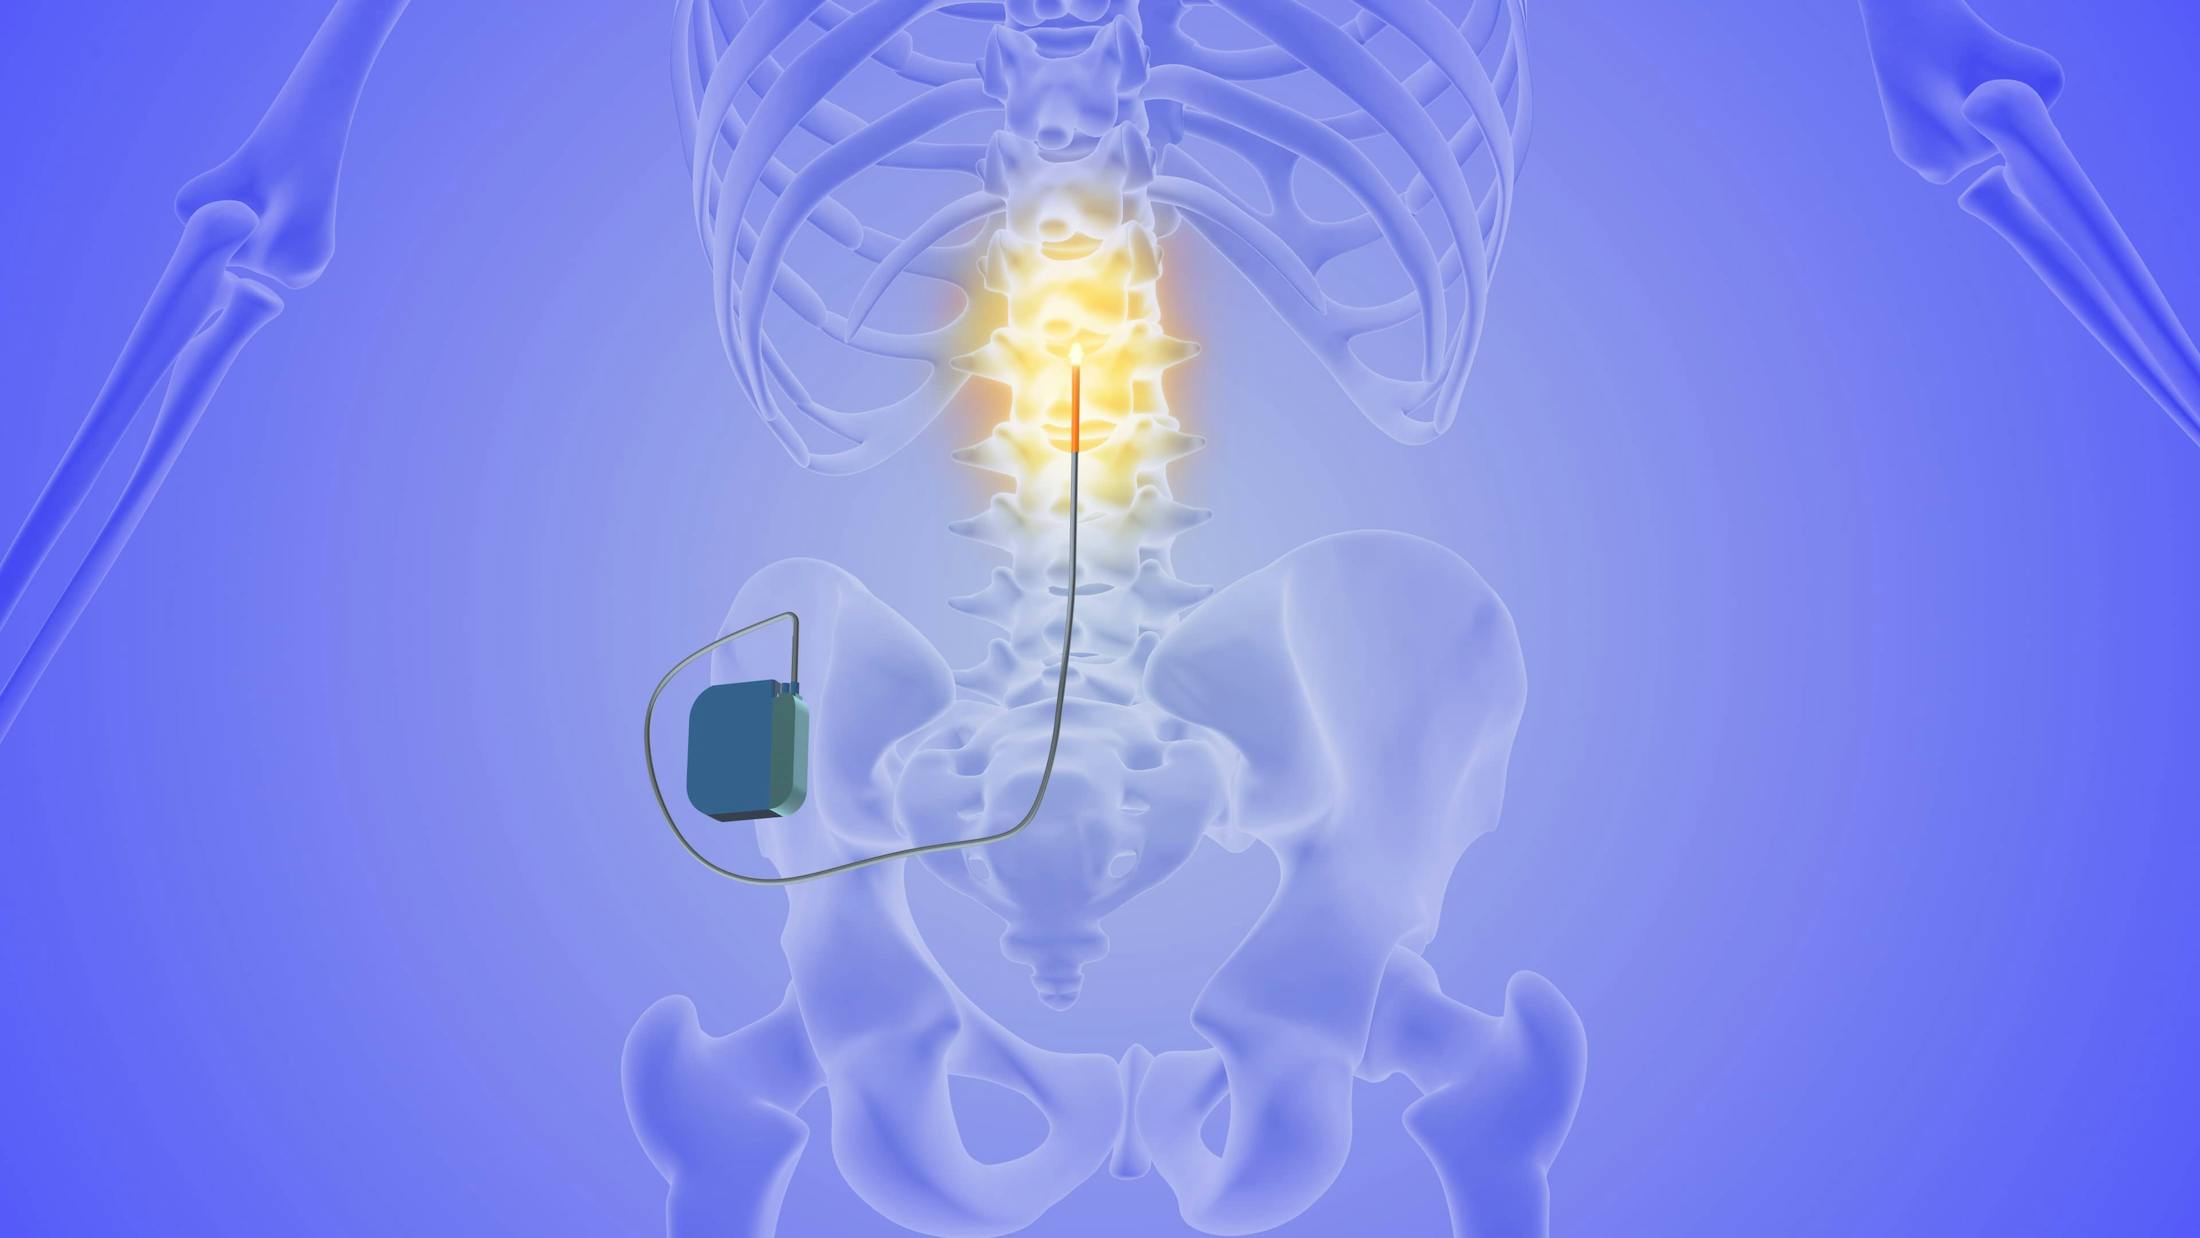 3d image of spinal cord stimulation